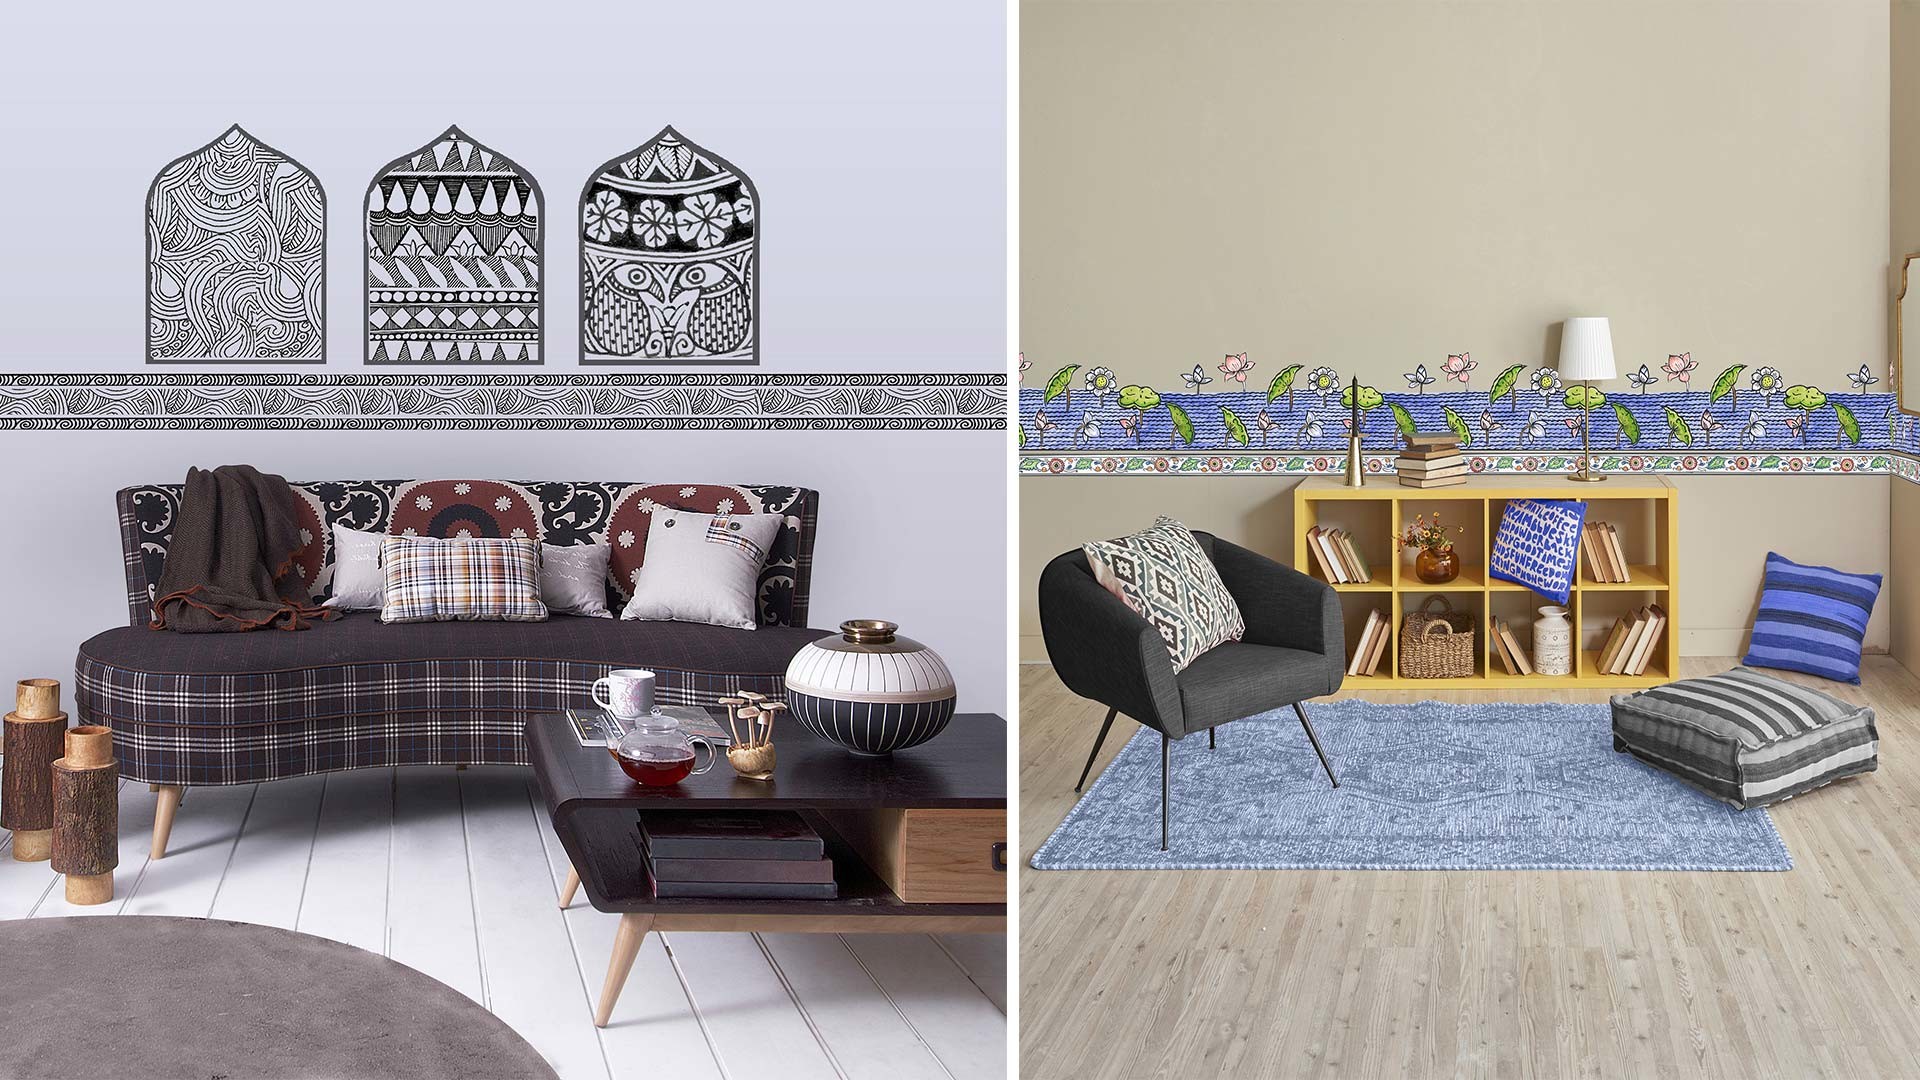 1920x1080 Here's how you can incorporate folk art into your home's interior design